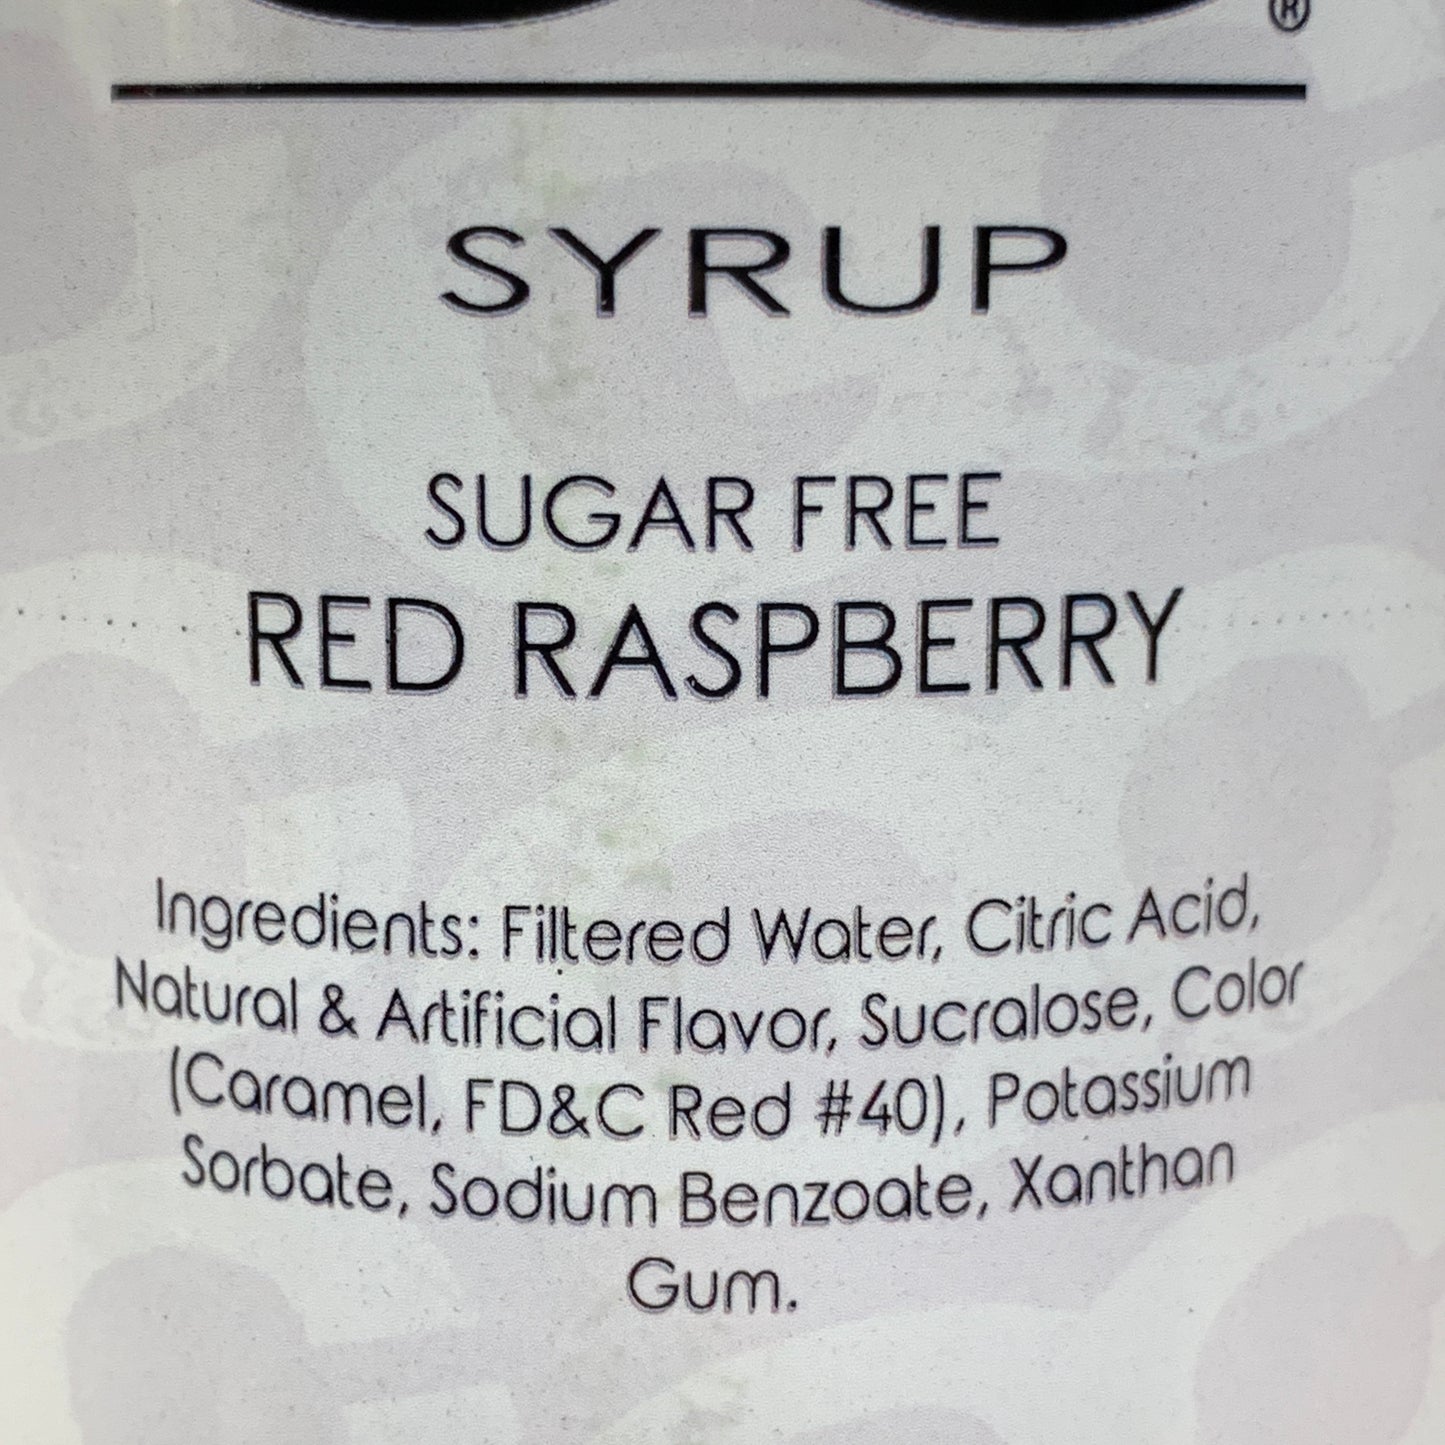 GC COFFEE CO. (3 PACK) Red Raspberry Flavoring Syrup 32 fl oz BB 9/24 0341